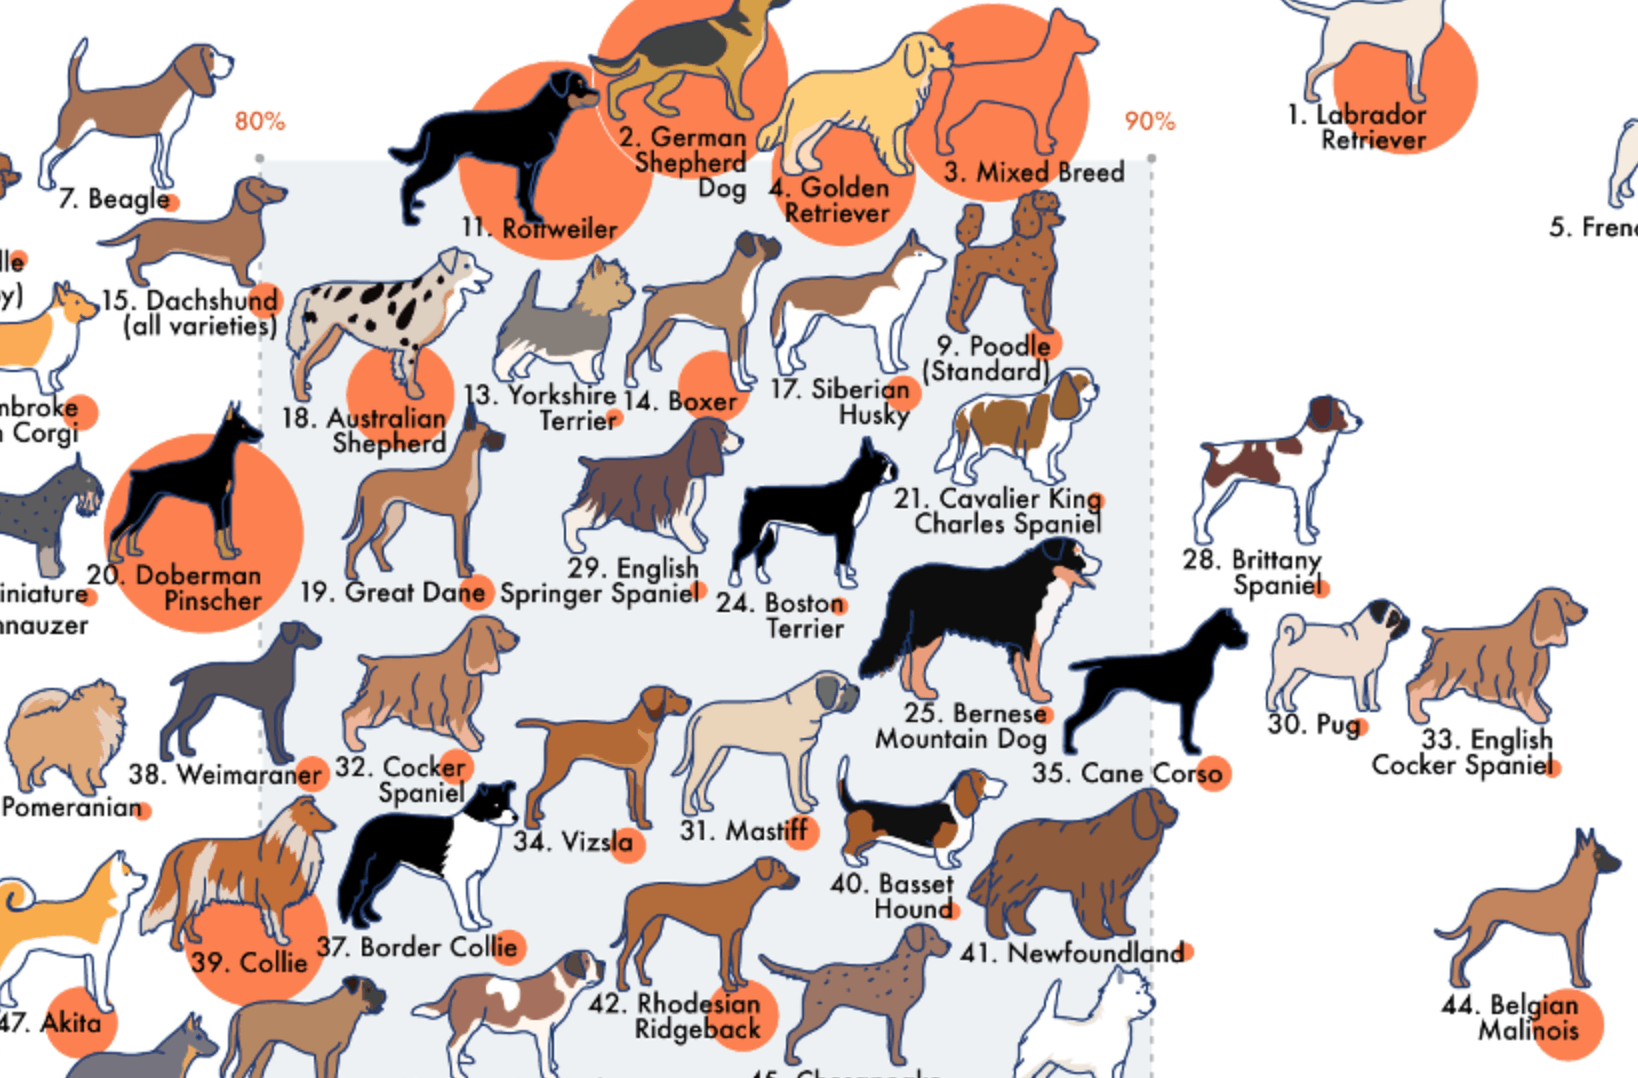 This Infographic Visualizes Dog Breeds Ranked by Temperament The